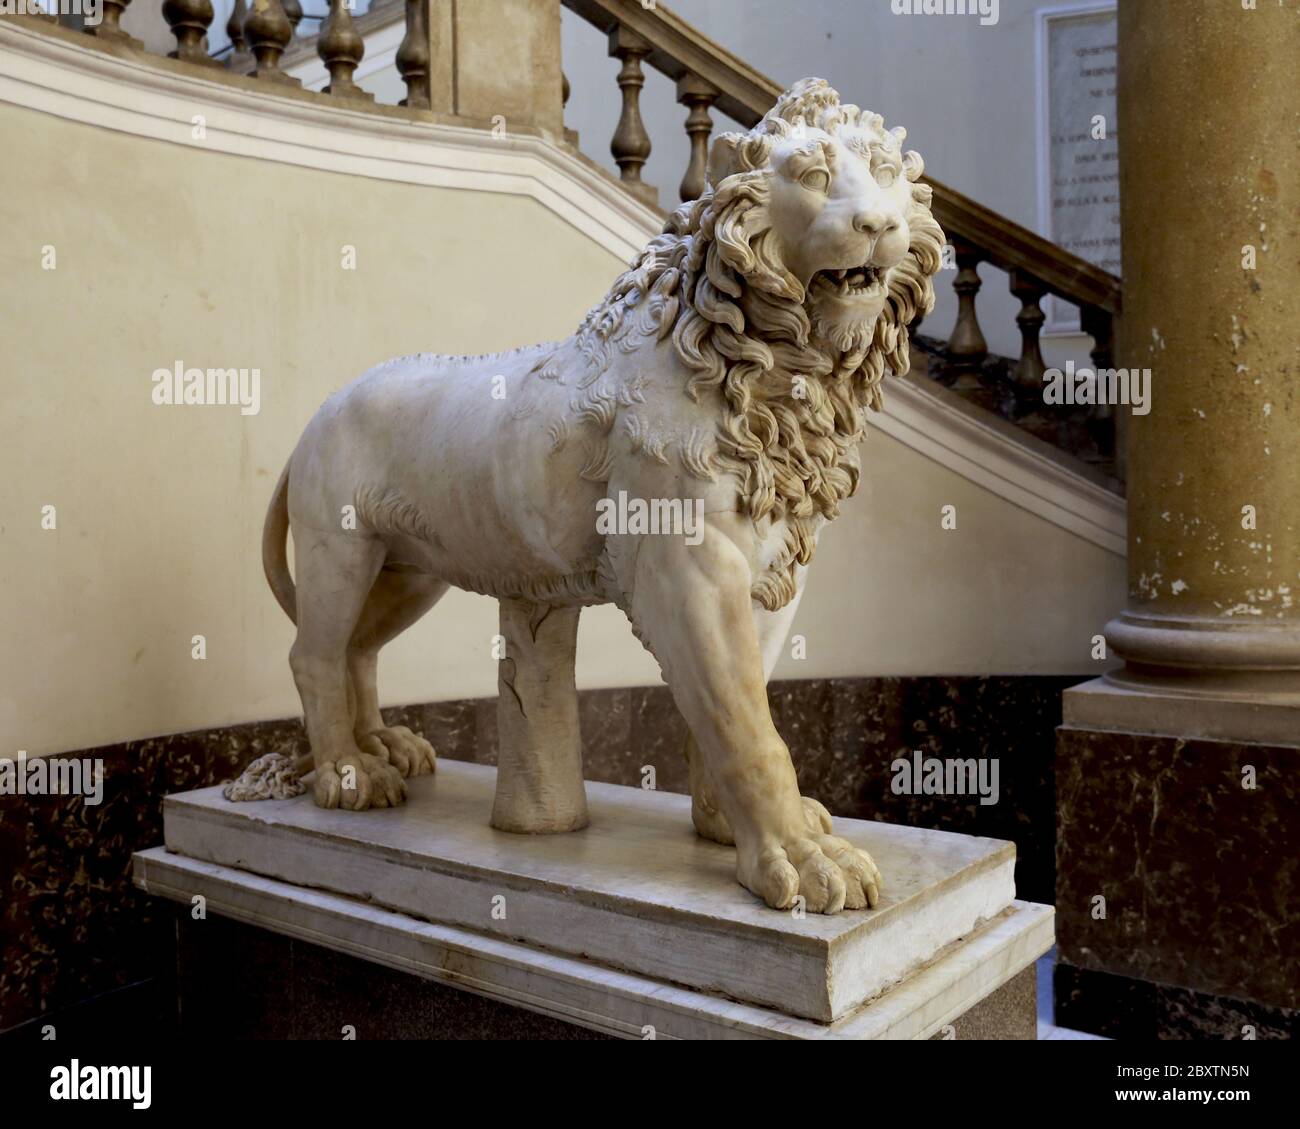 Statue of a Lion, from Rome, Mid 2nd. century AD. Farnese Collection. Marble. Hadrian Period. Naples Archaeological Museum, Italy. Stock Photo